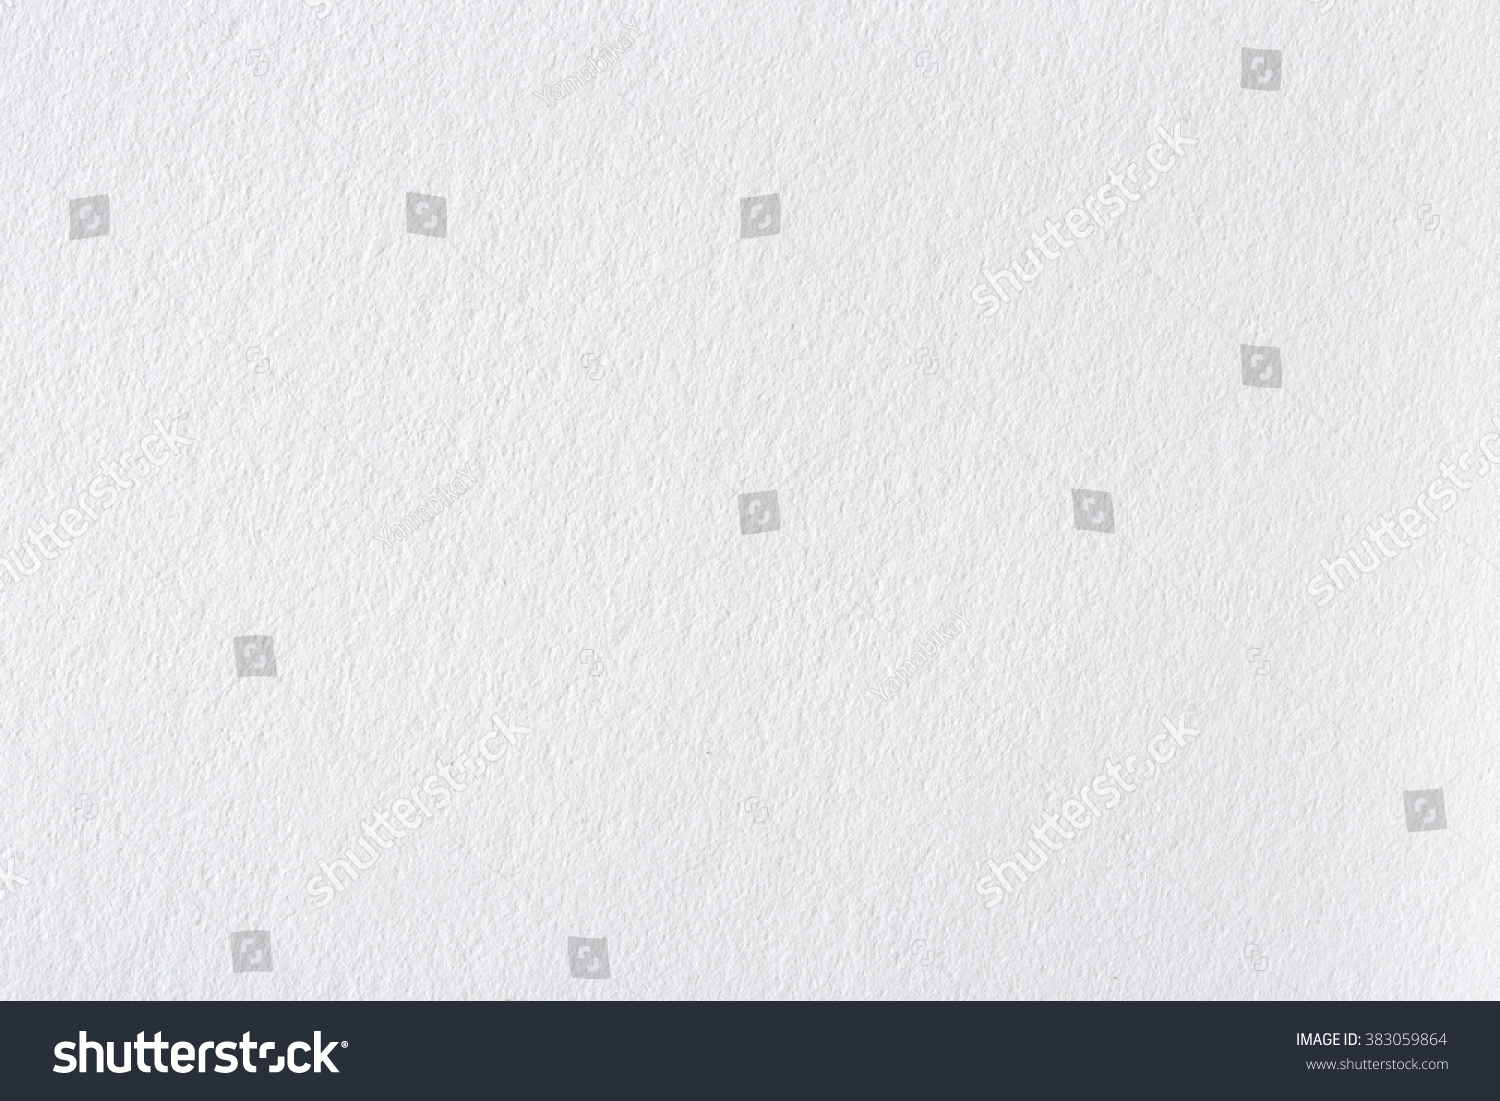 White Linen Paper Texture Images Stock Photos And Vectors Shutterstock